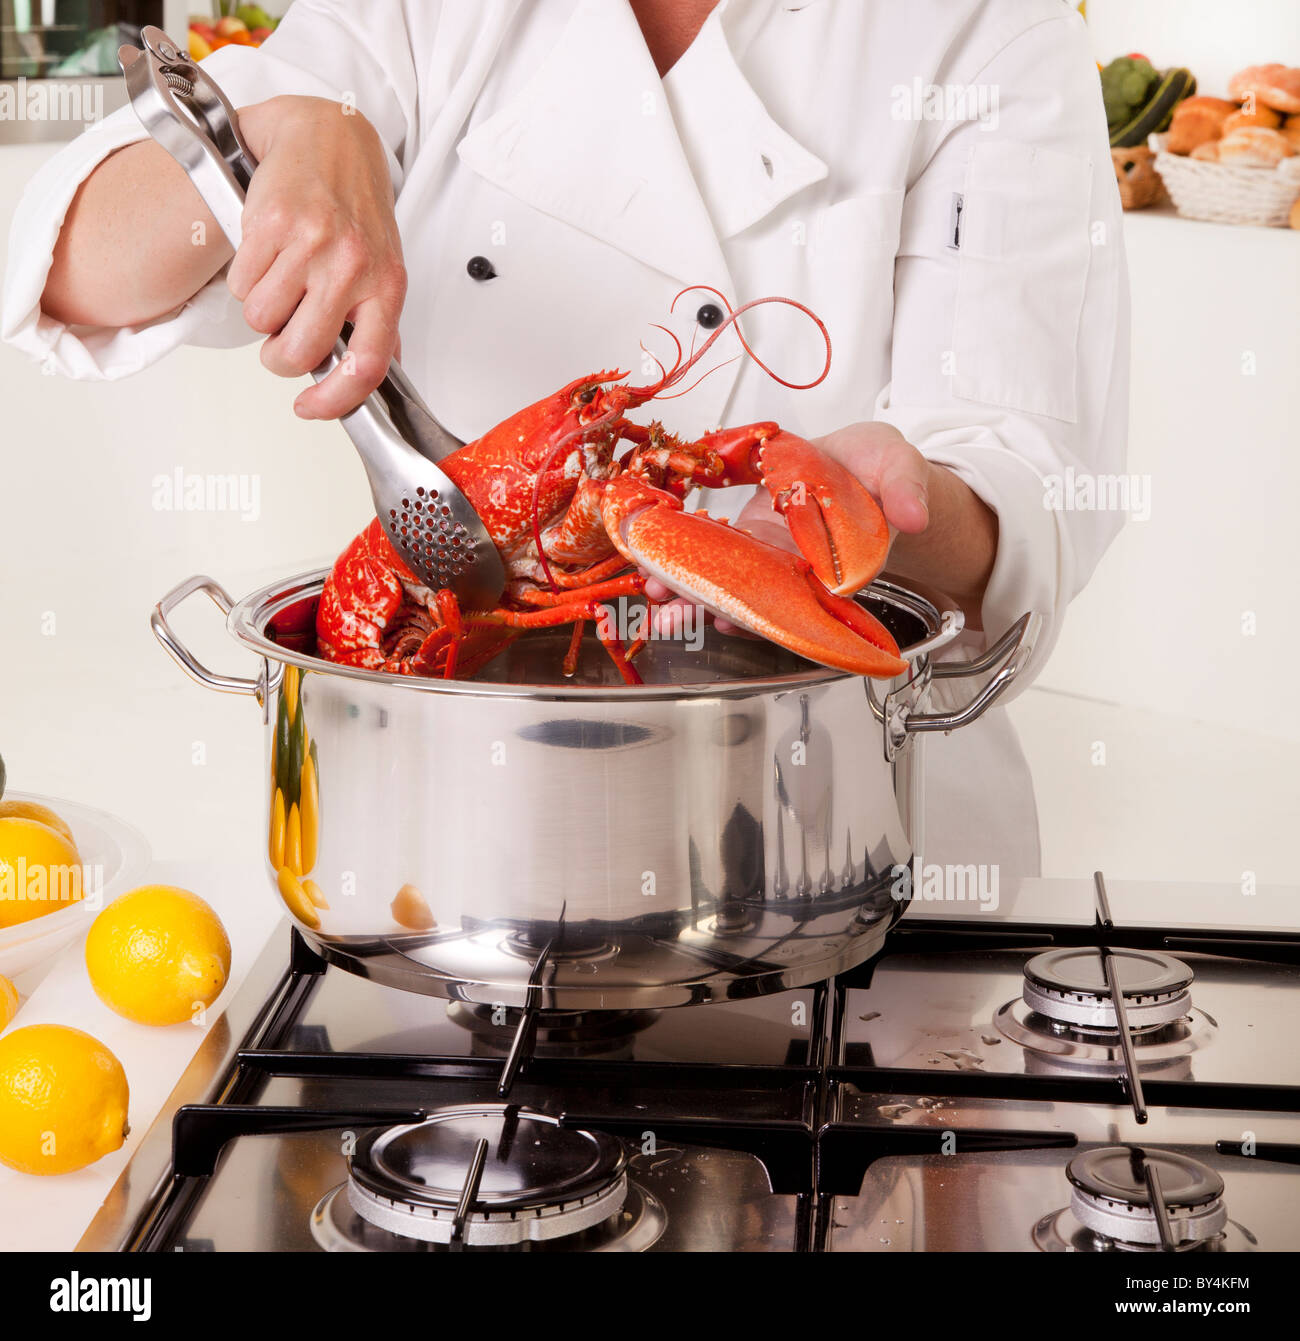 CHEF COOKING LOBSTER Stock Photo